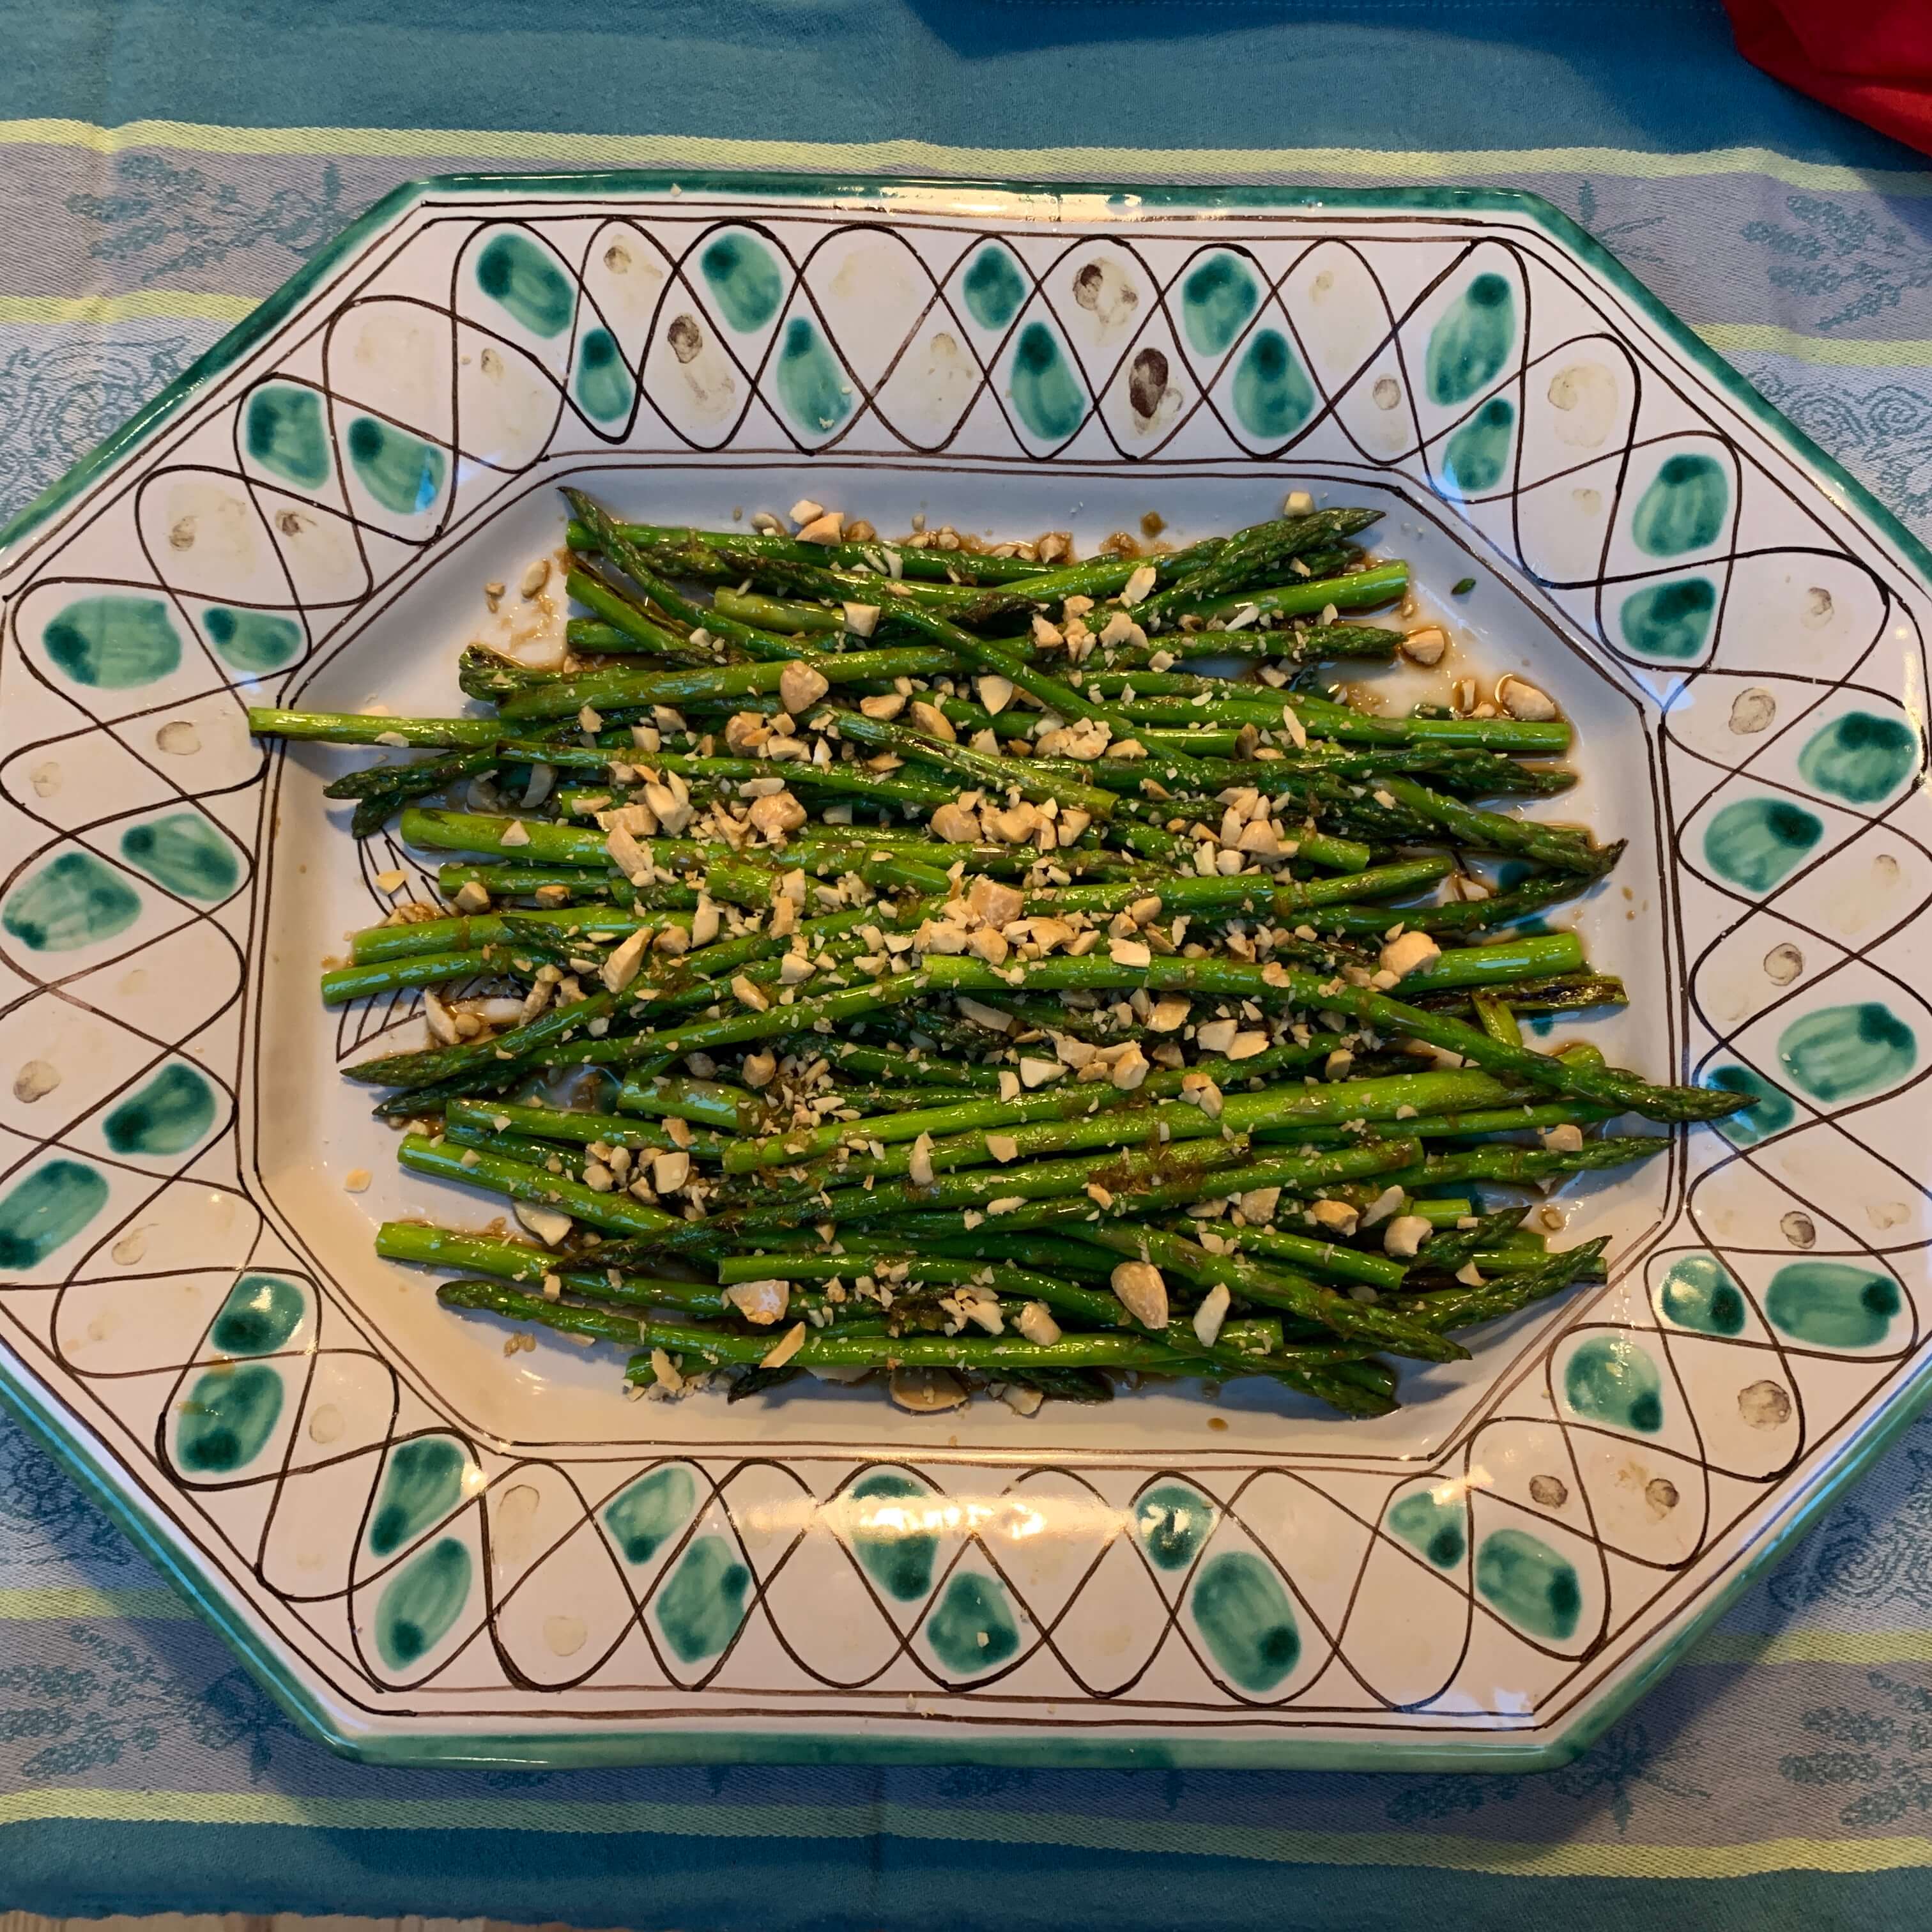 Plated asparagus topped with slivered almonds